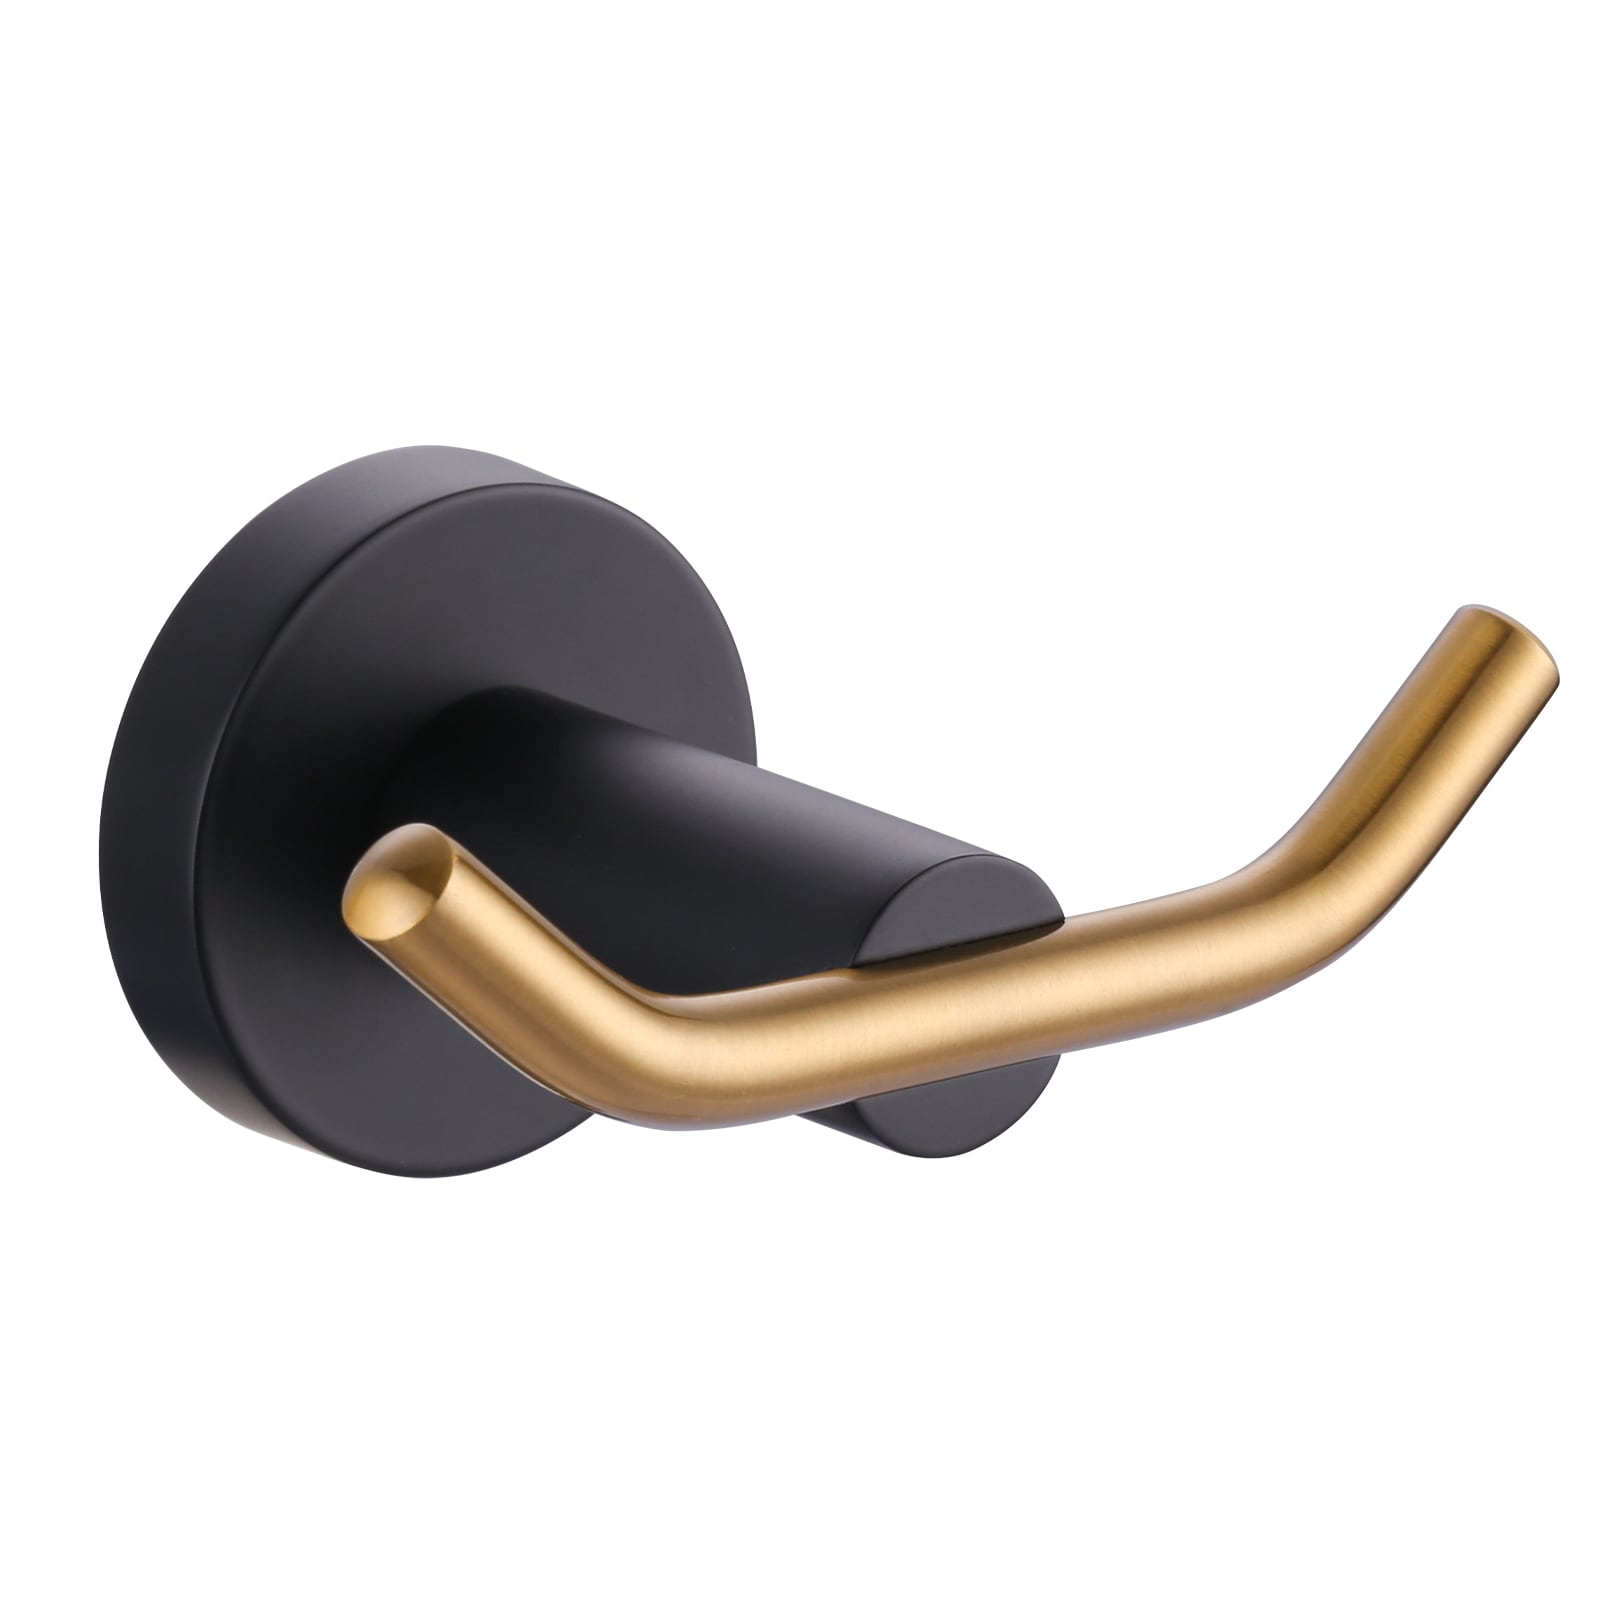 WOWOW Black and Gold Single-Hook Wall Mount Towel Hook in the